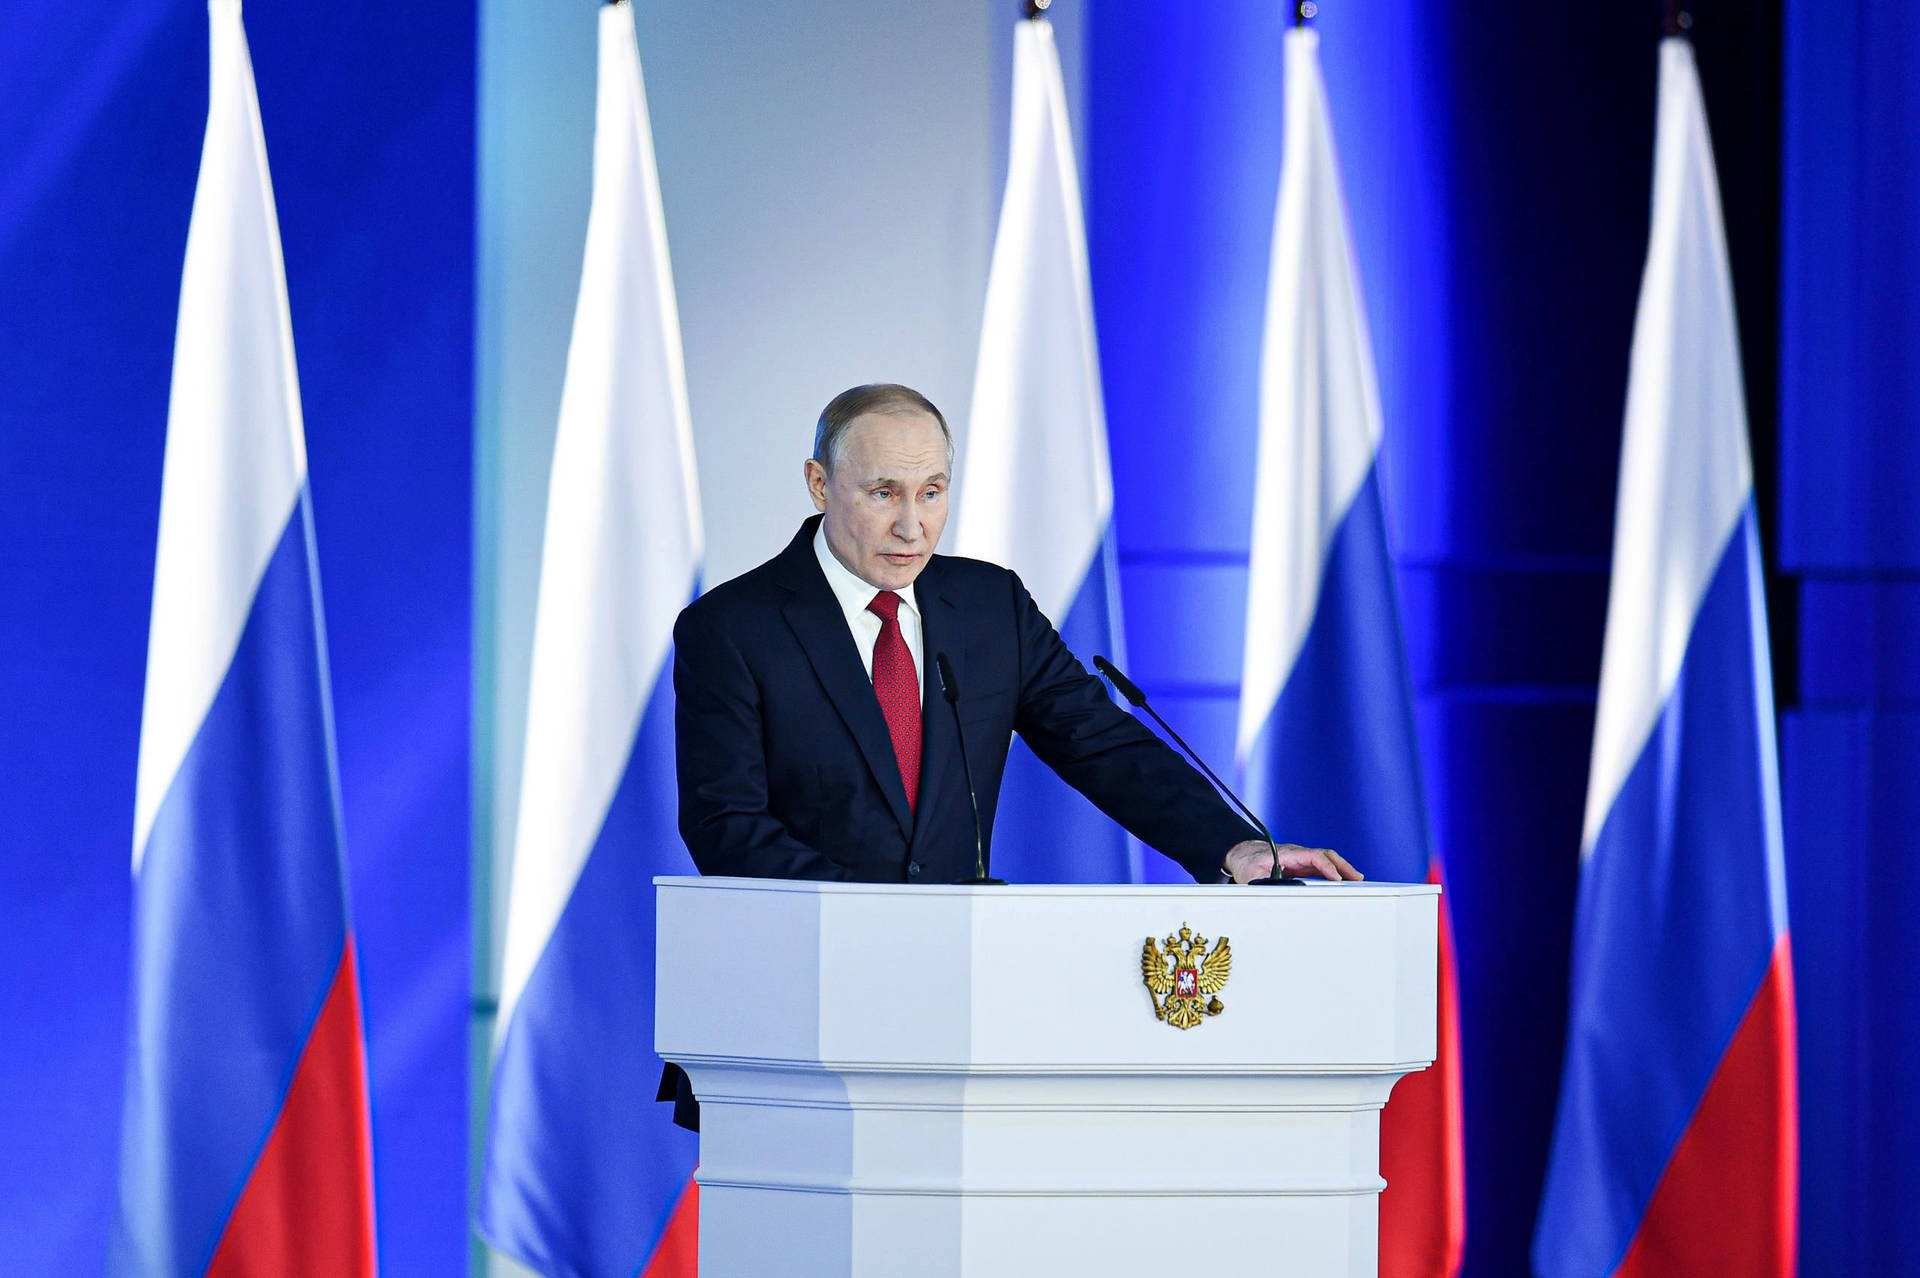 Vladimir Putin With Five Flags Behind Picture